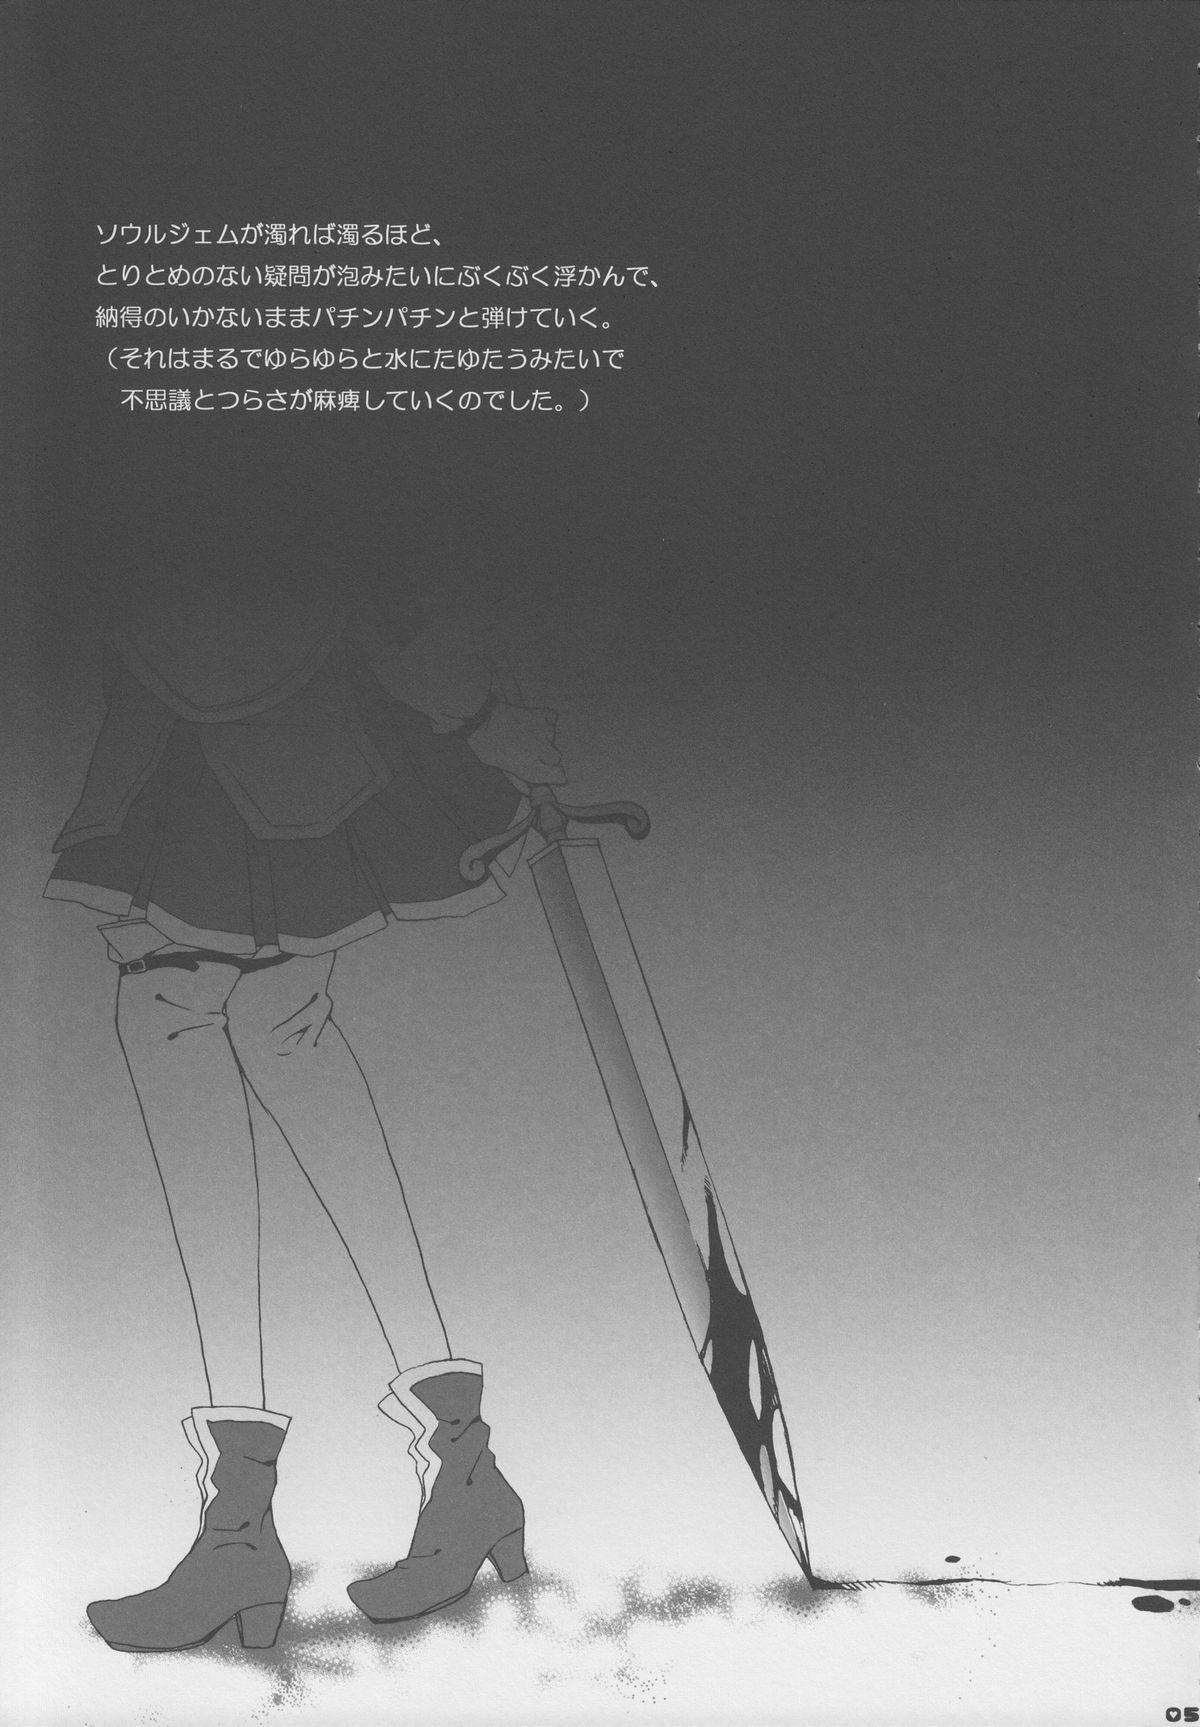 Foreplay Bye Bye, Together - Puella magi madoka magica Mulher - Page 4